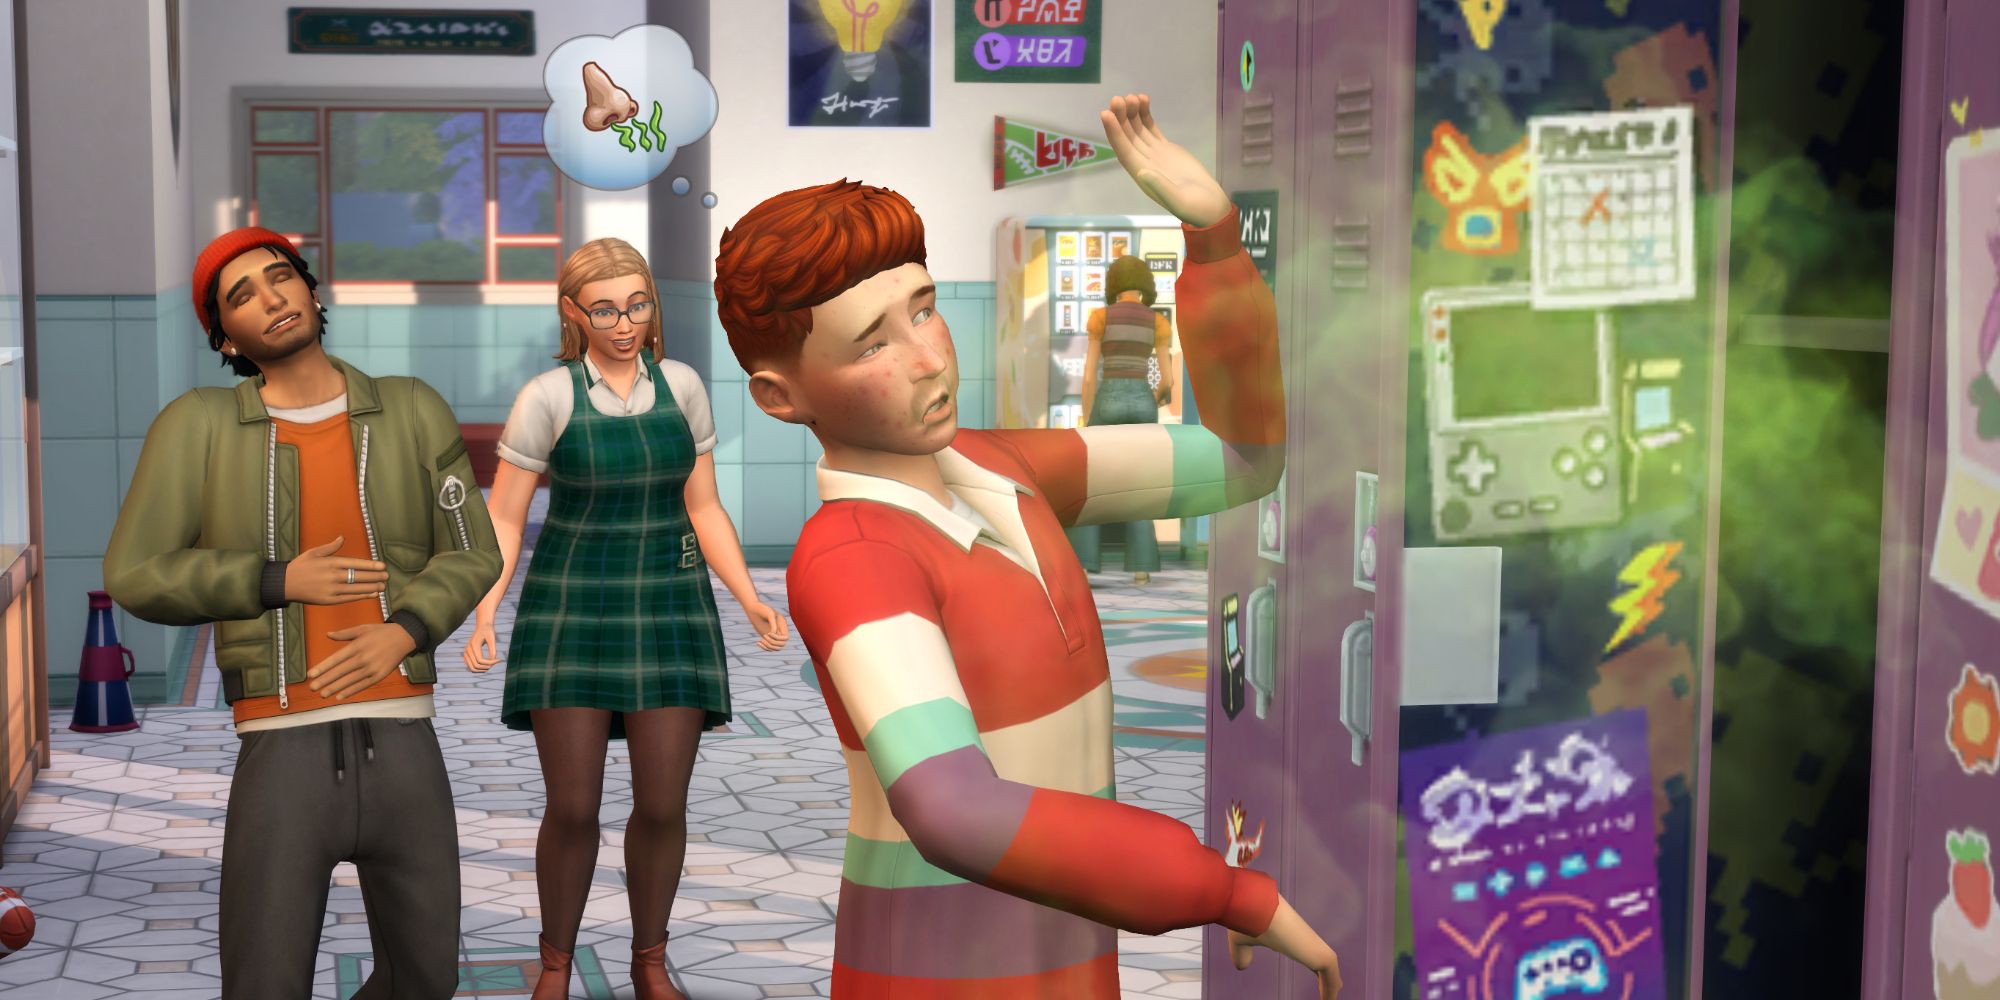 The newest base game update for The Sims 4 has made it nearly unplayable because of bugs.